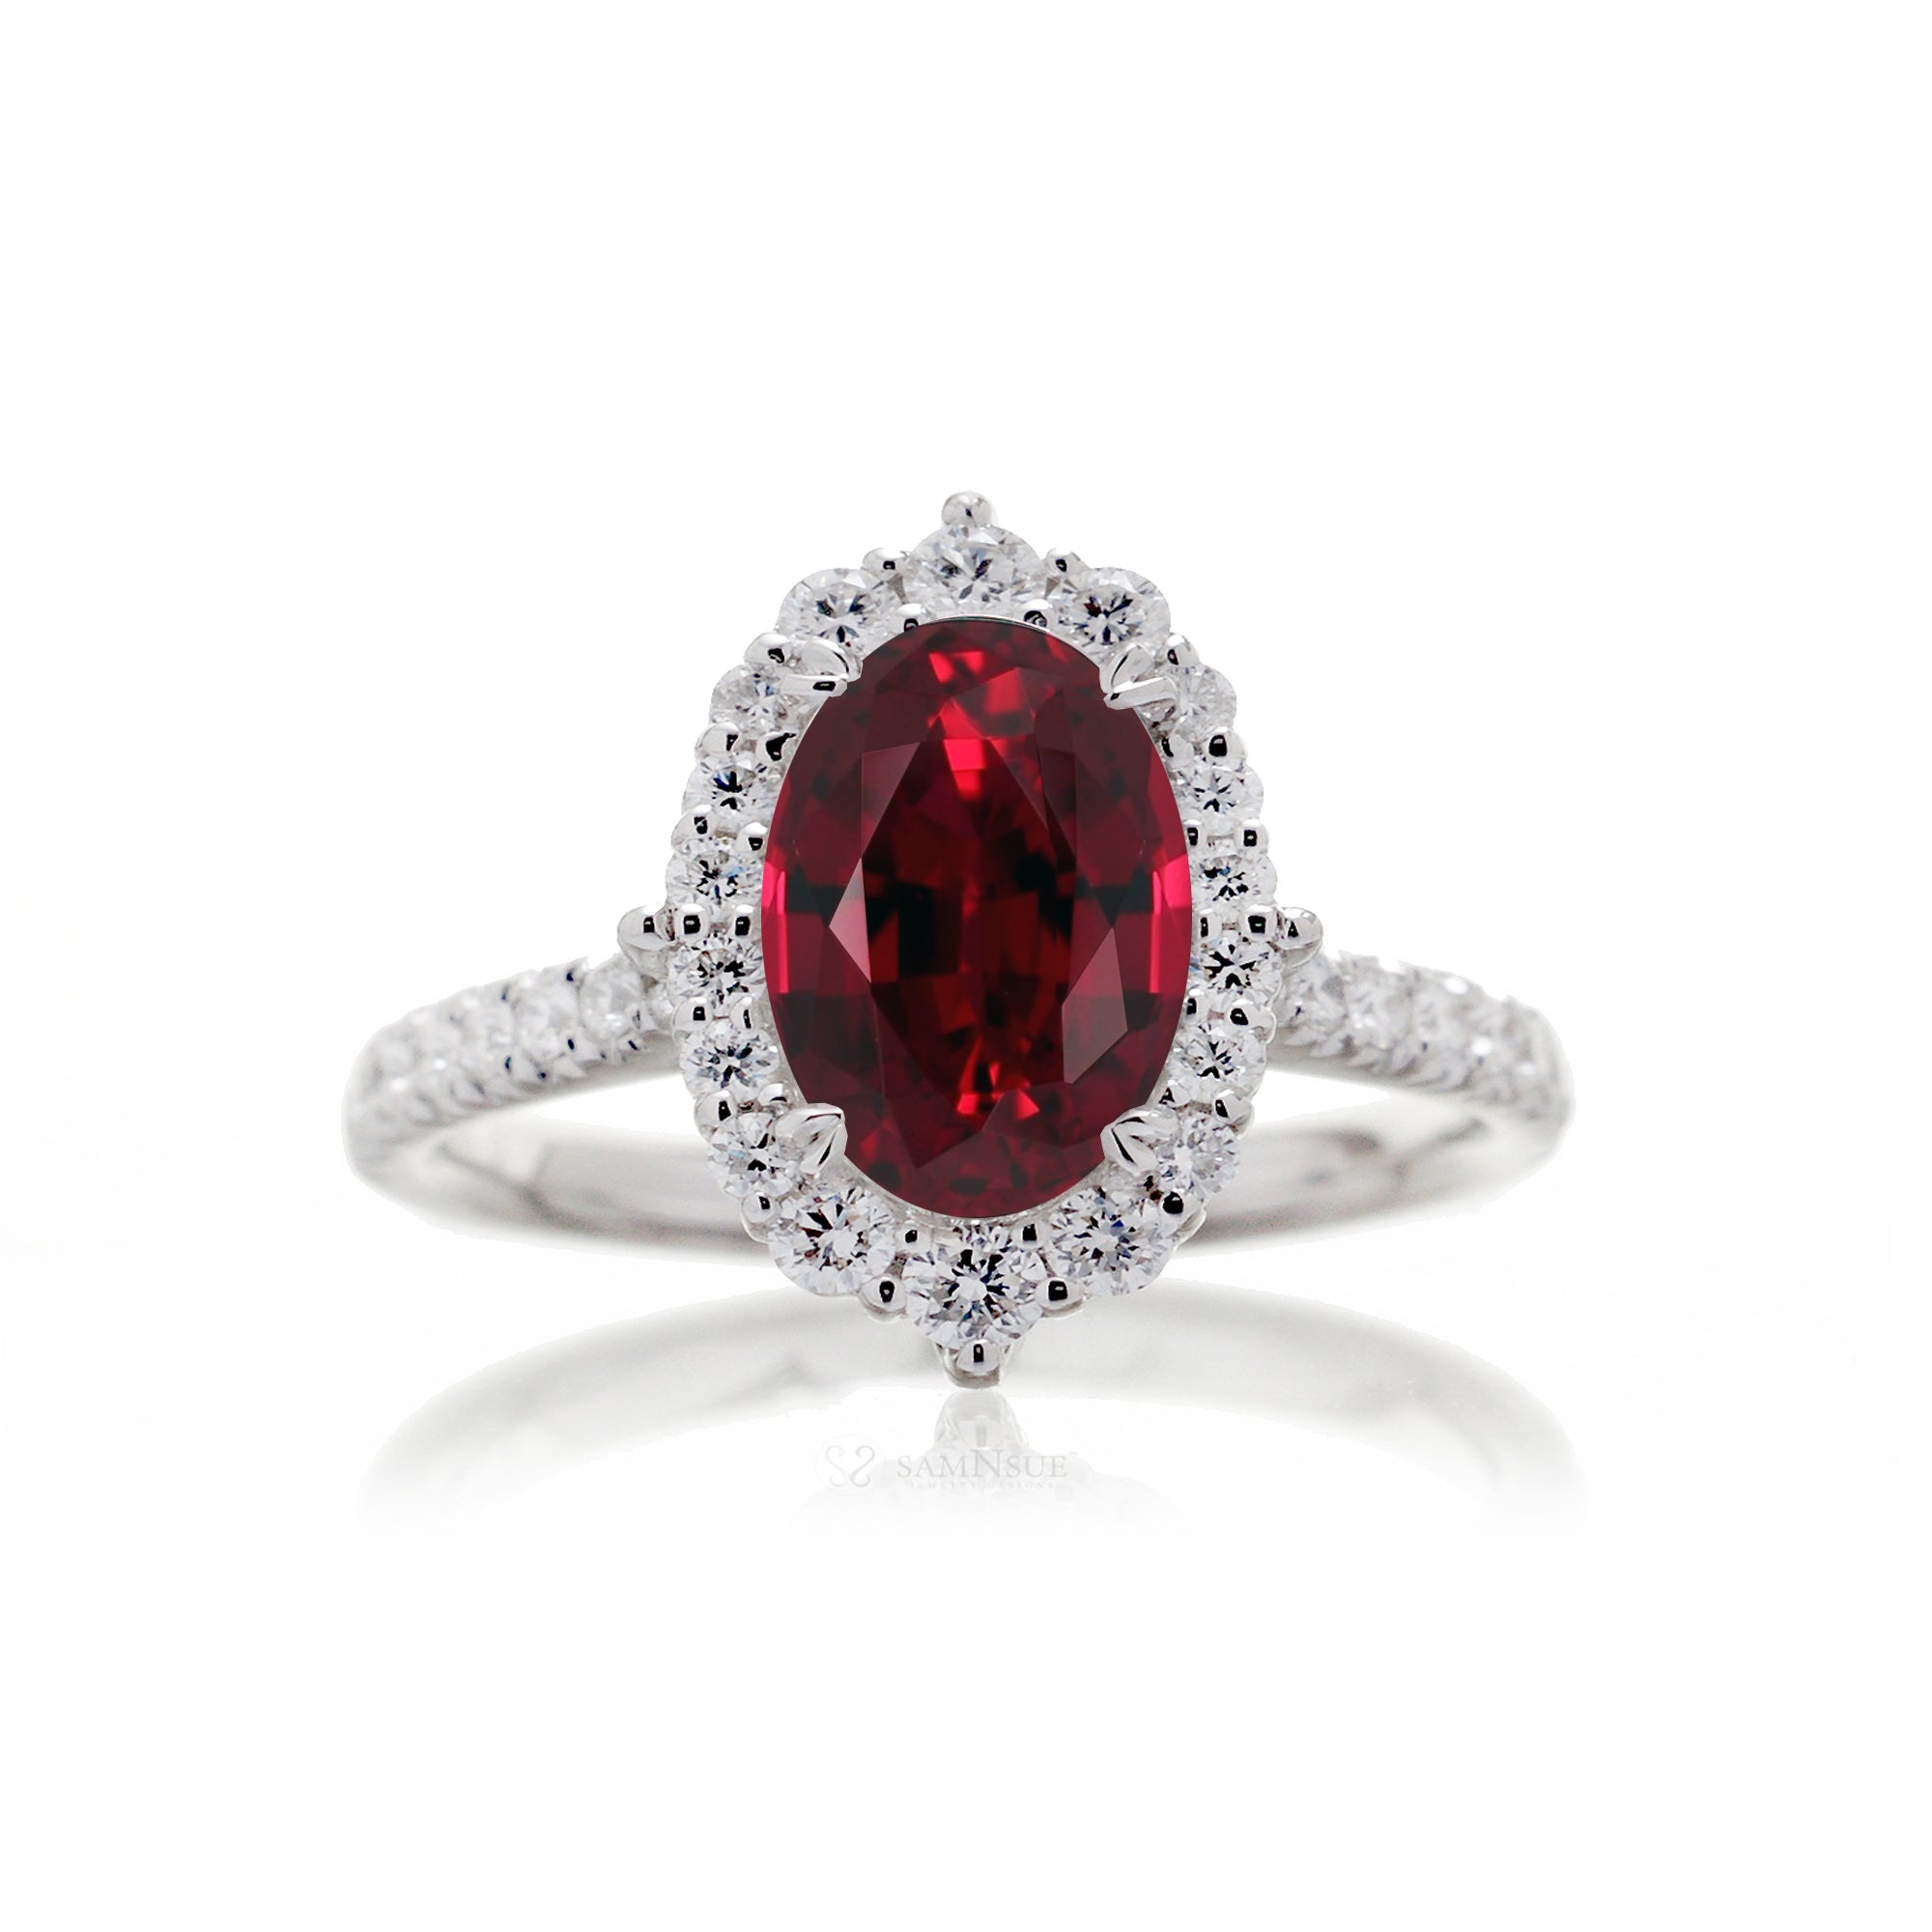 The Haley Oval Lab-Grown Ruby Ring